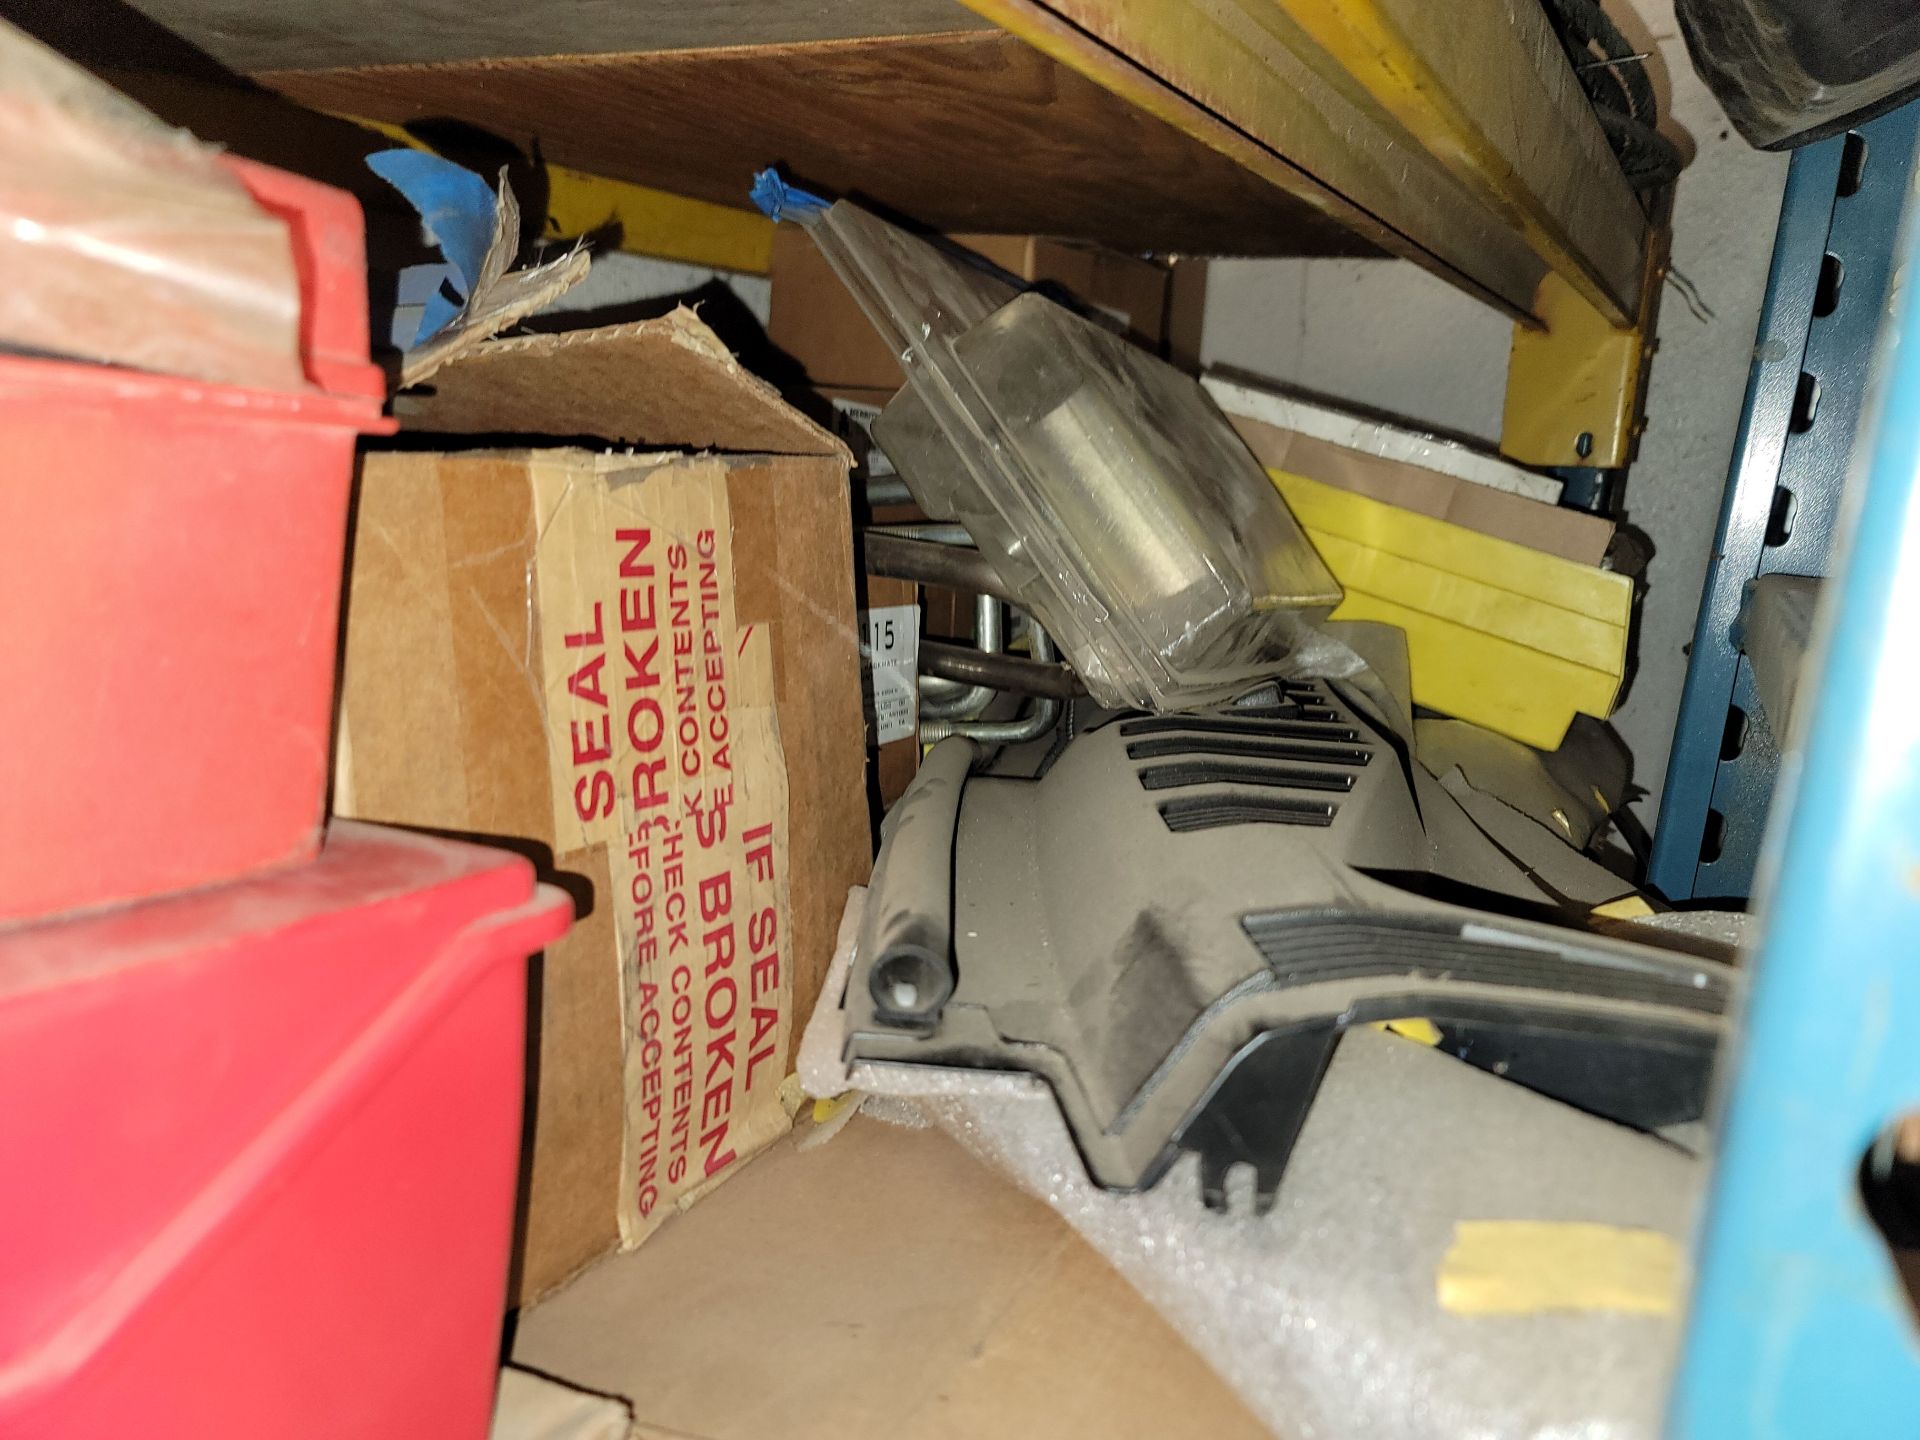 LOT - CONTENTS ONLY OF (1) 6' SHELF, TO INCLUDE: 4" TIE DOWN STRAPS, PINTLE HITCHES AND DRAWBARS, - Image 2 of 3